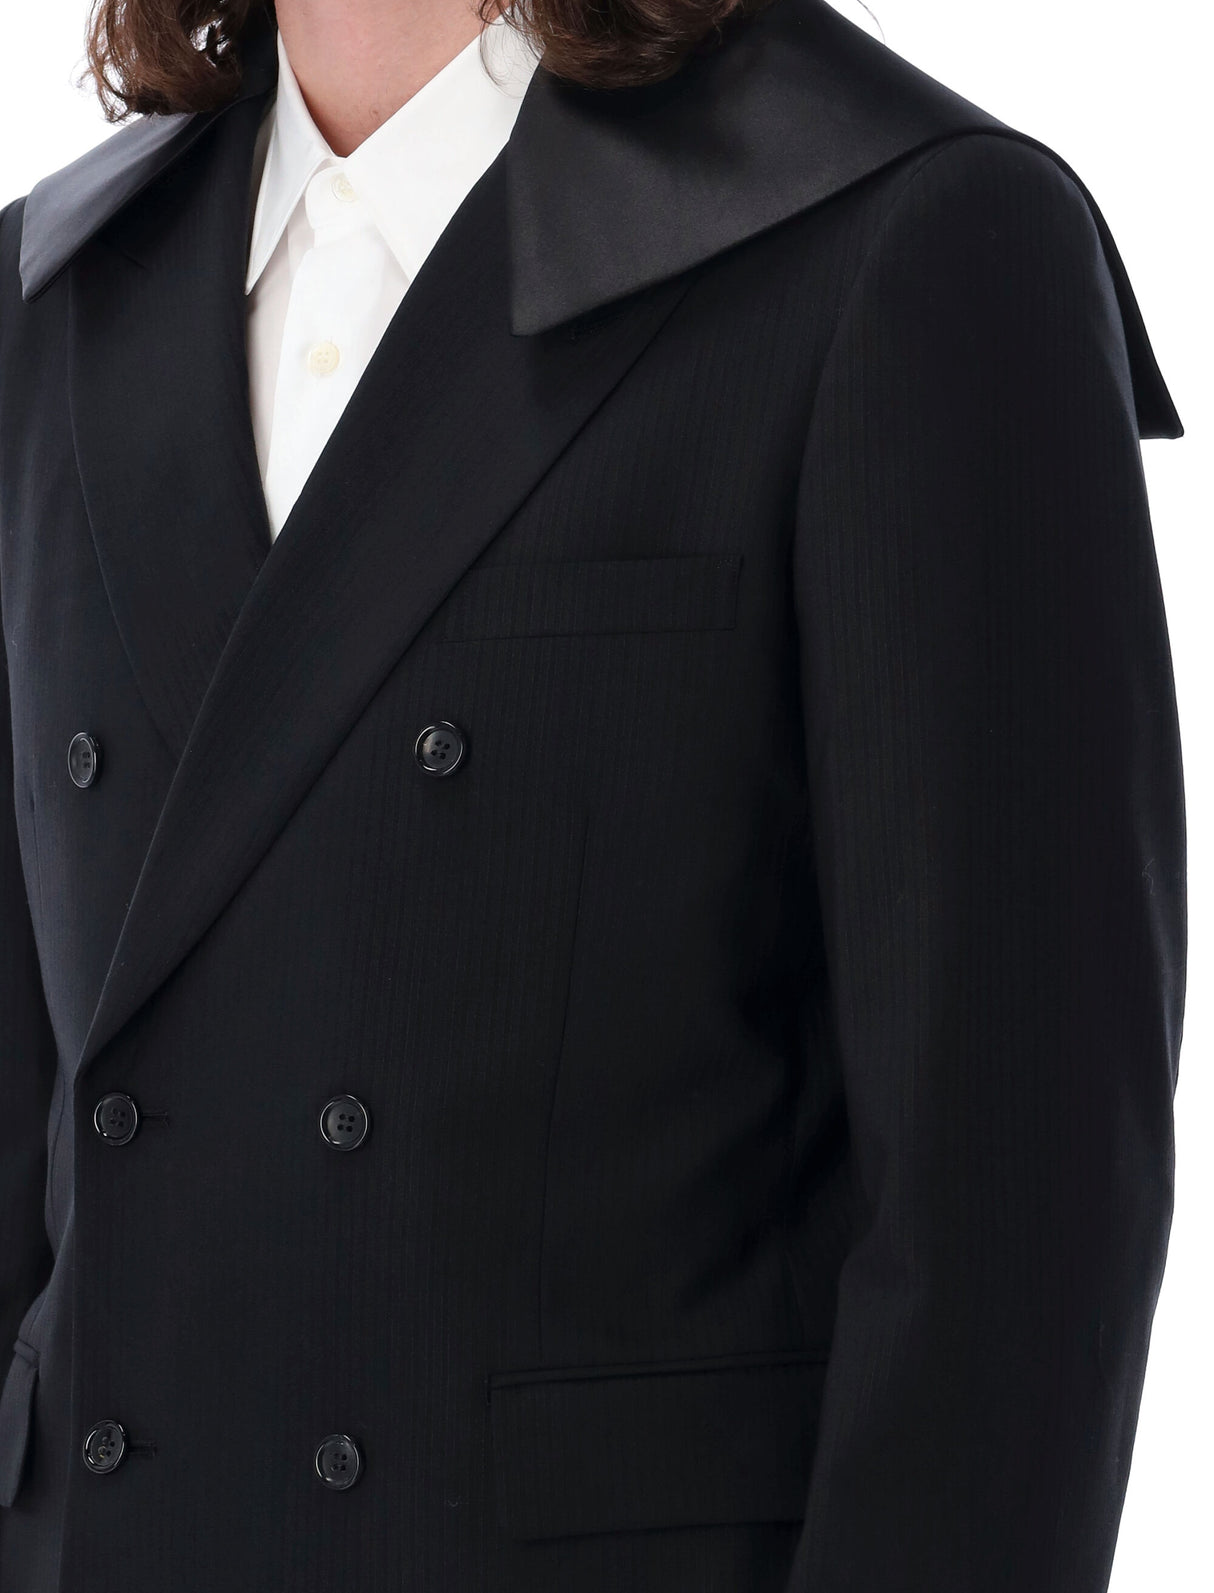 Men's Double-Breasted Wool Blazer with Shiny Satin Collar